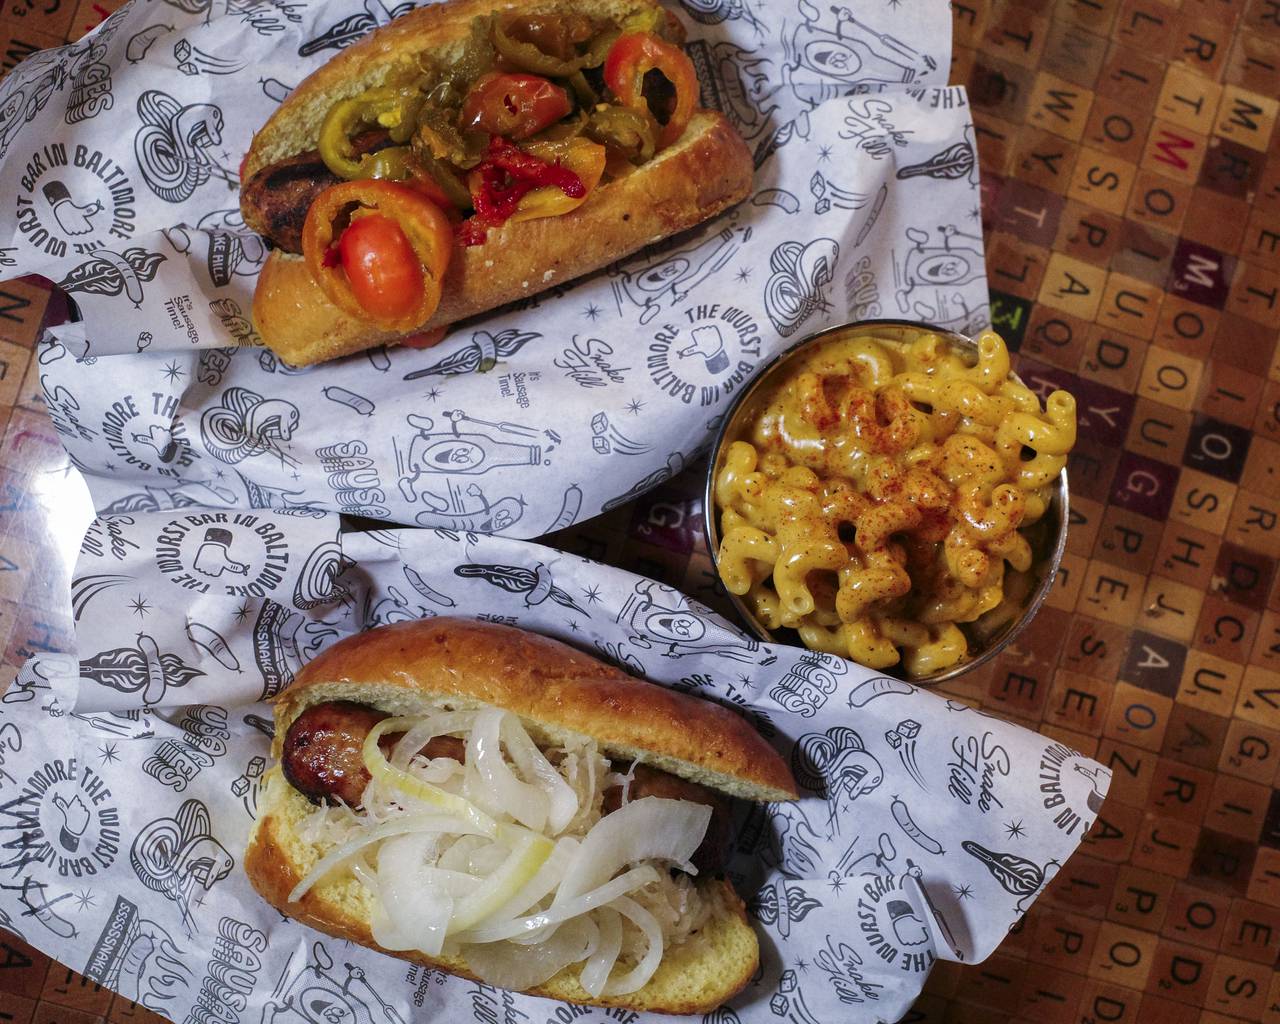 From left; Thai Chicken sausage with lemon grass, green chilis, and kaff, macaroni and cheese, and a Natty Boh bratwurst with sauerkraut, onions and spicy brown mustard.